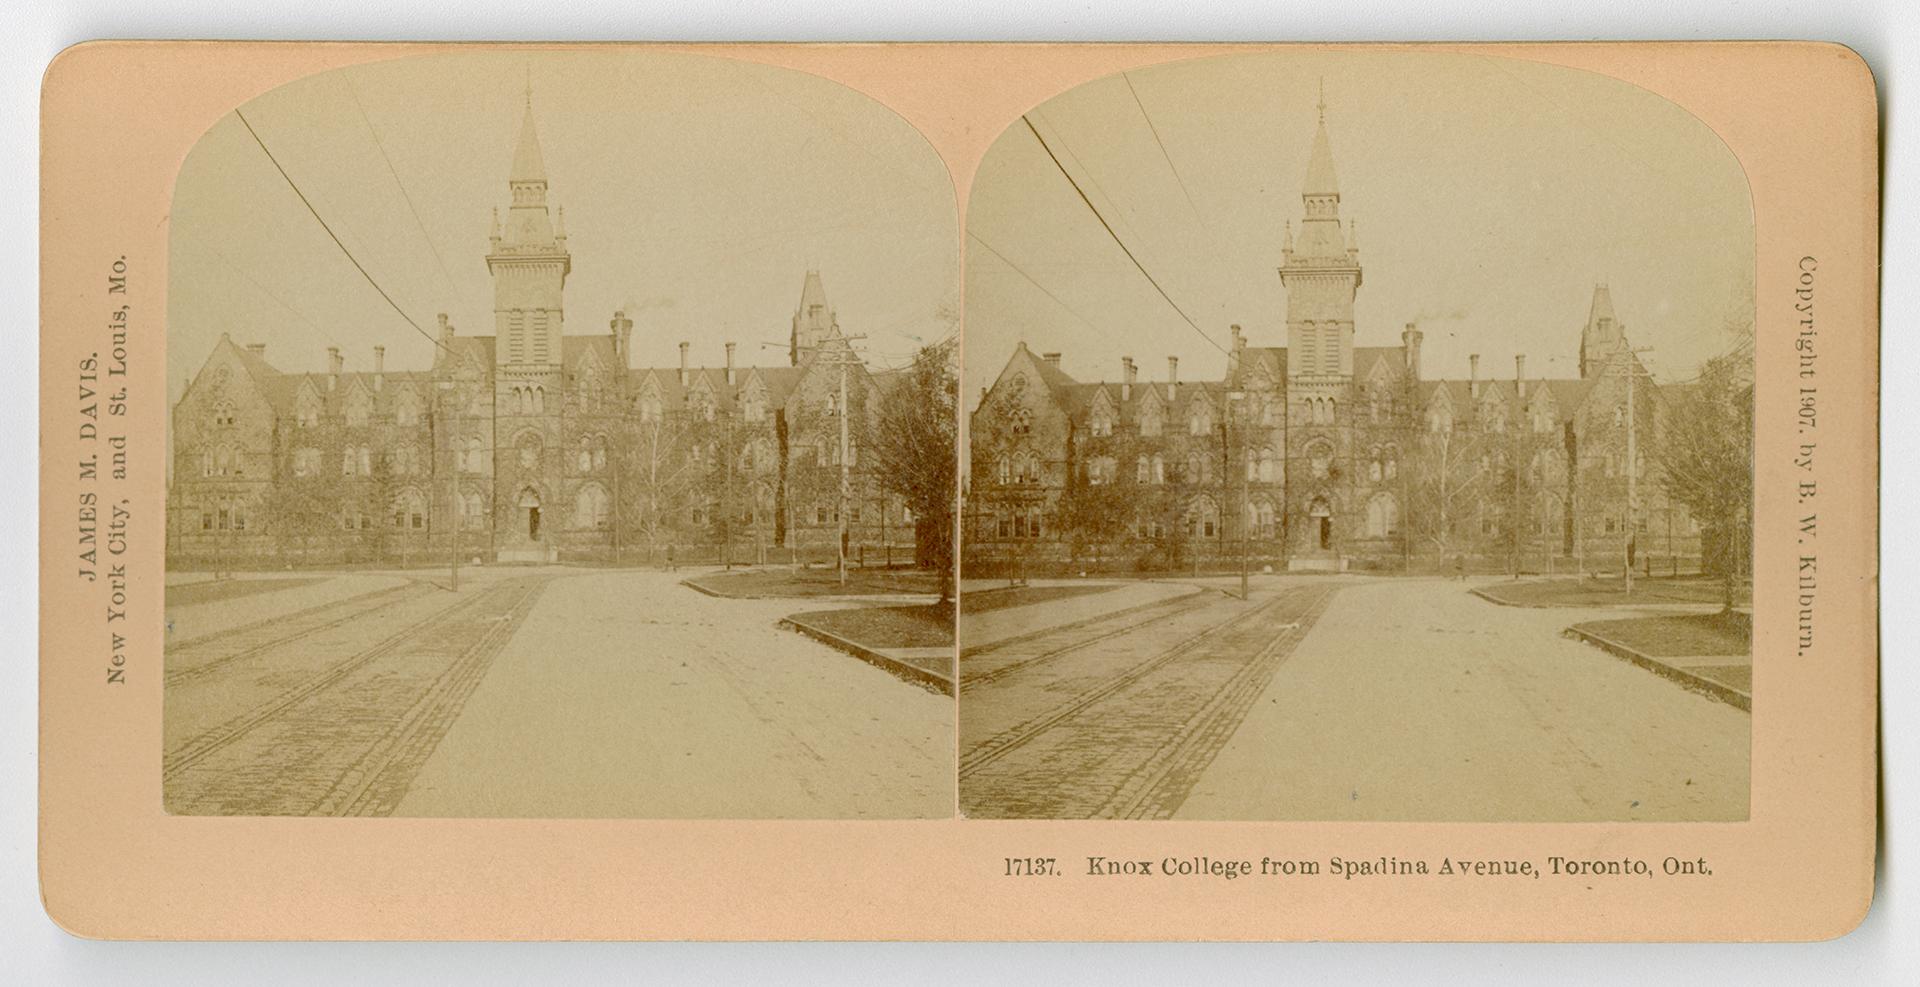 Pictures show a large, three story Victorian building with a central tower.